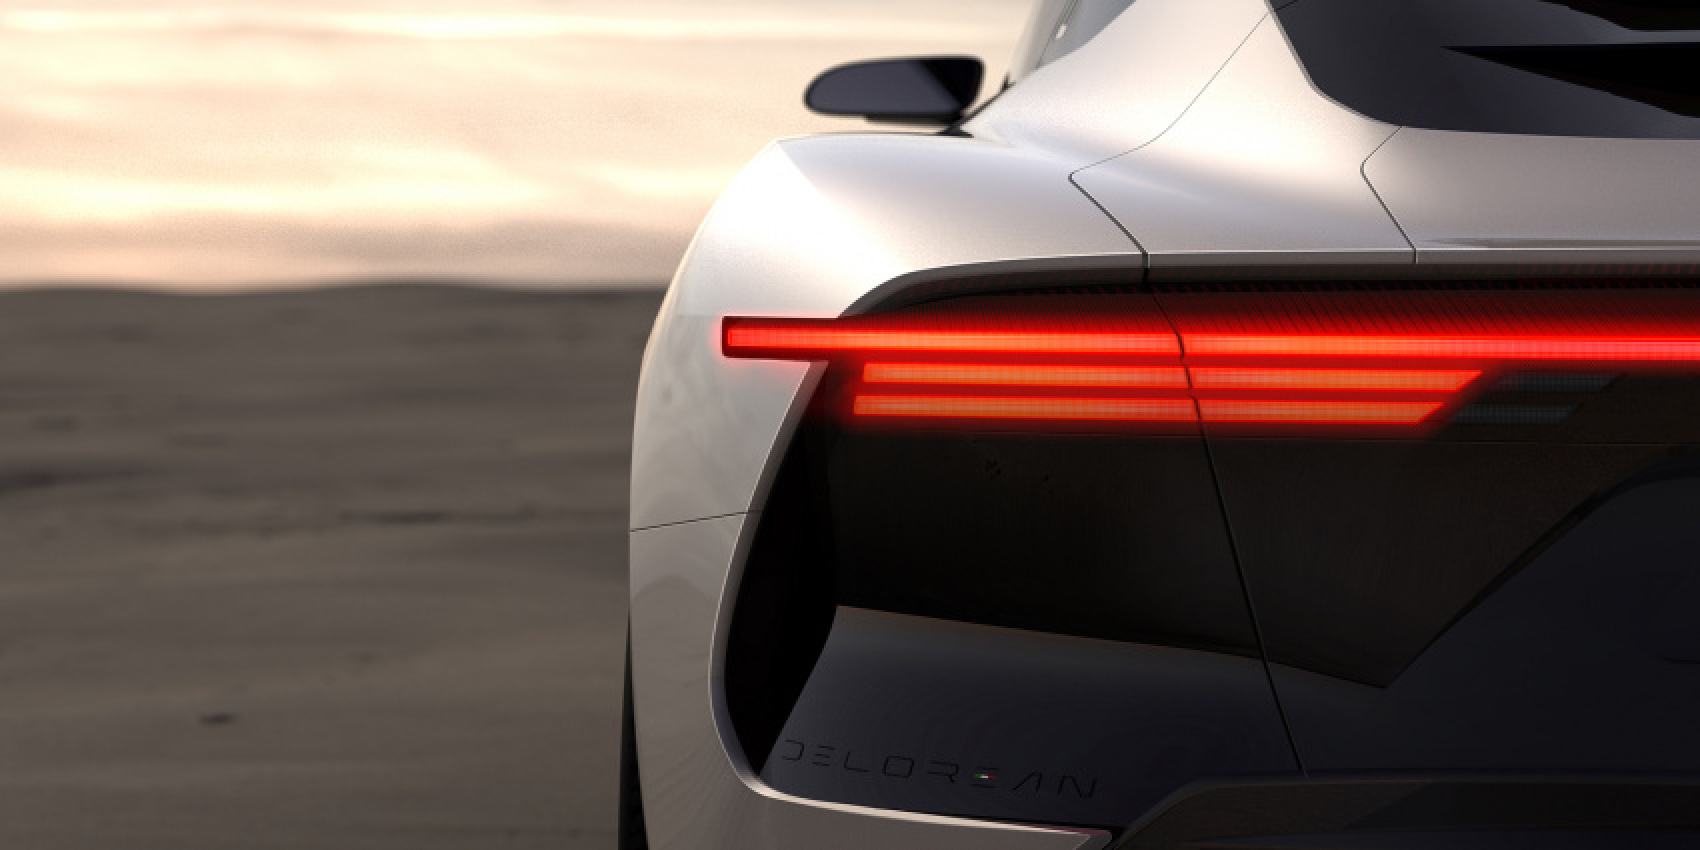 autos, cars, delorean, delorean motor company teases reveal date and sleek image of its gull-winged ev, ceo divulges a full line of new models [update]